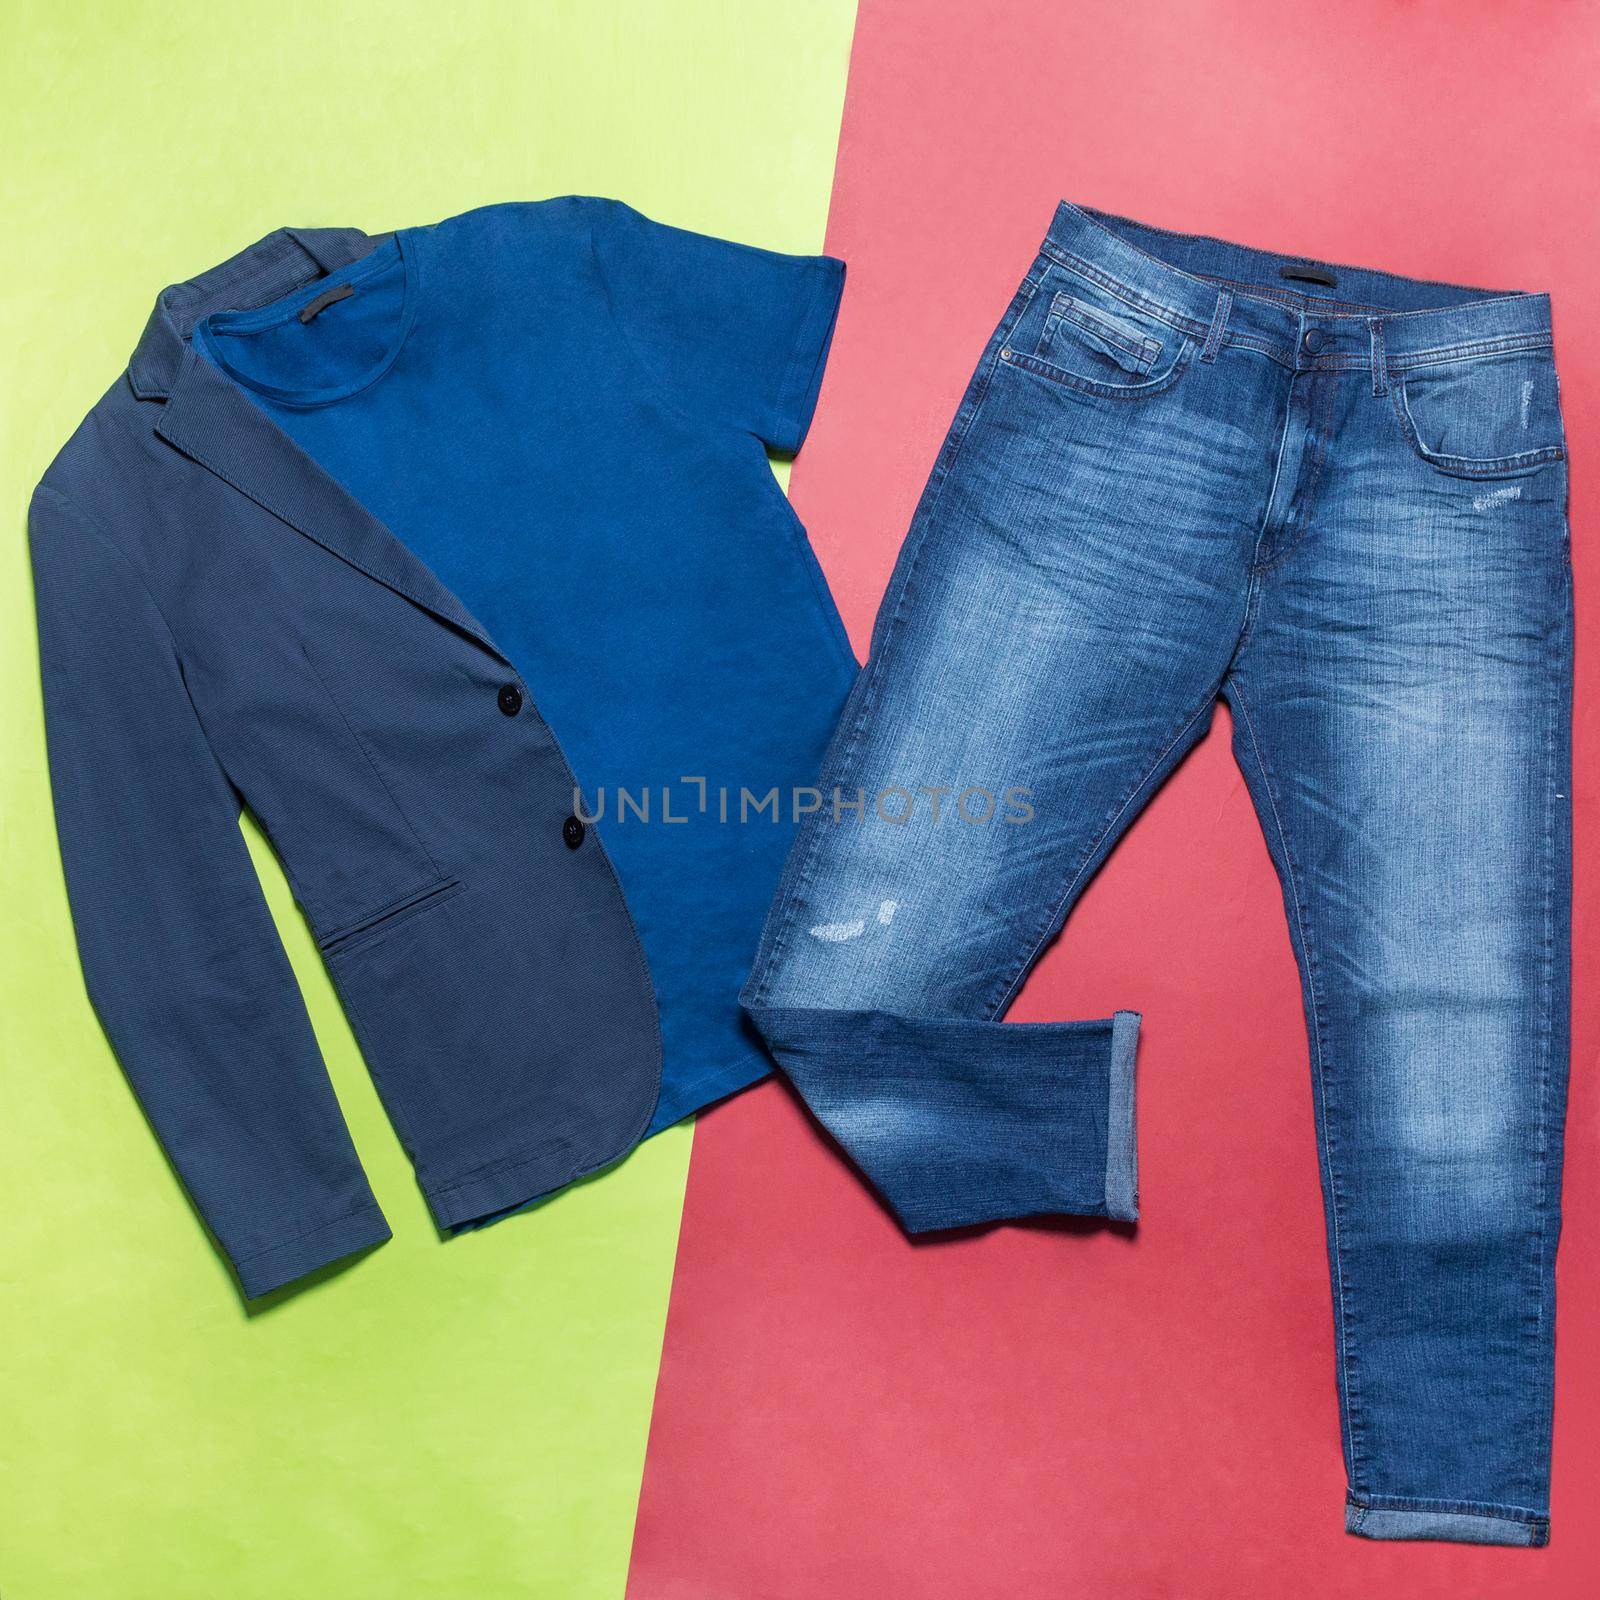 Man jacket t-shirt jeans pants top view by ferhad